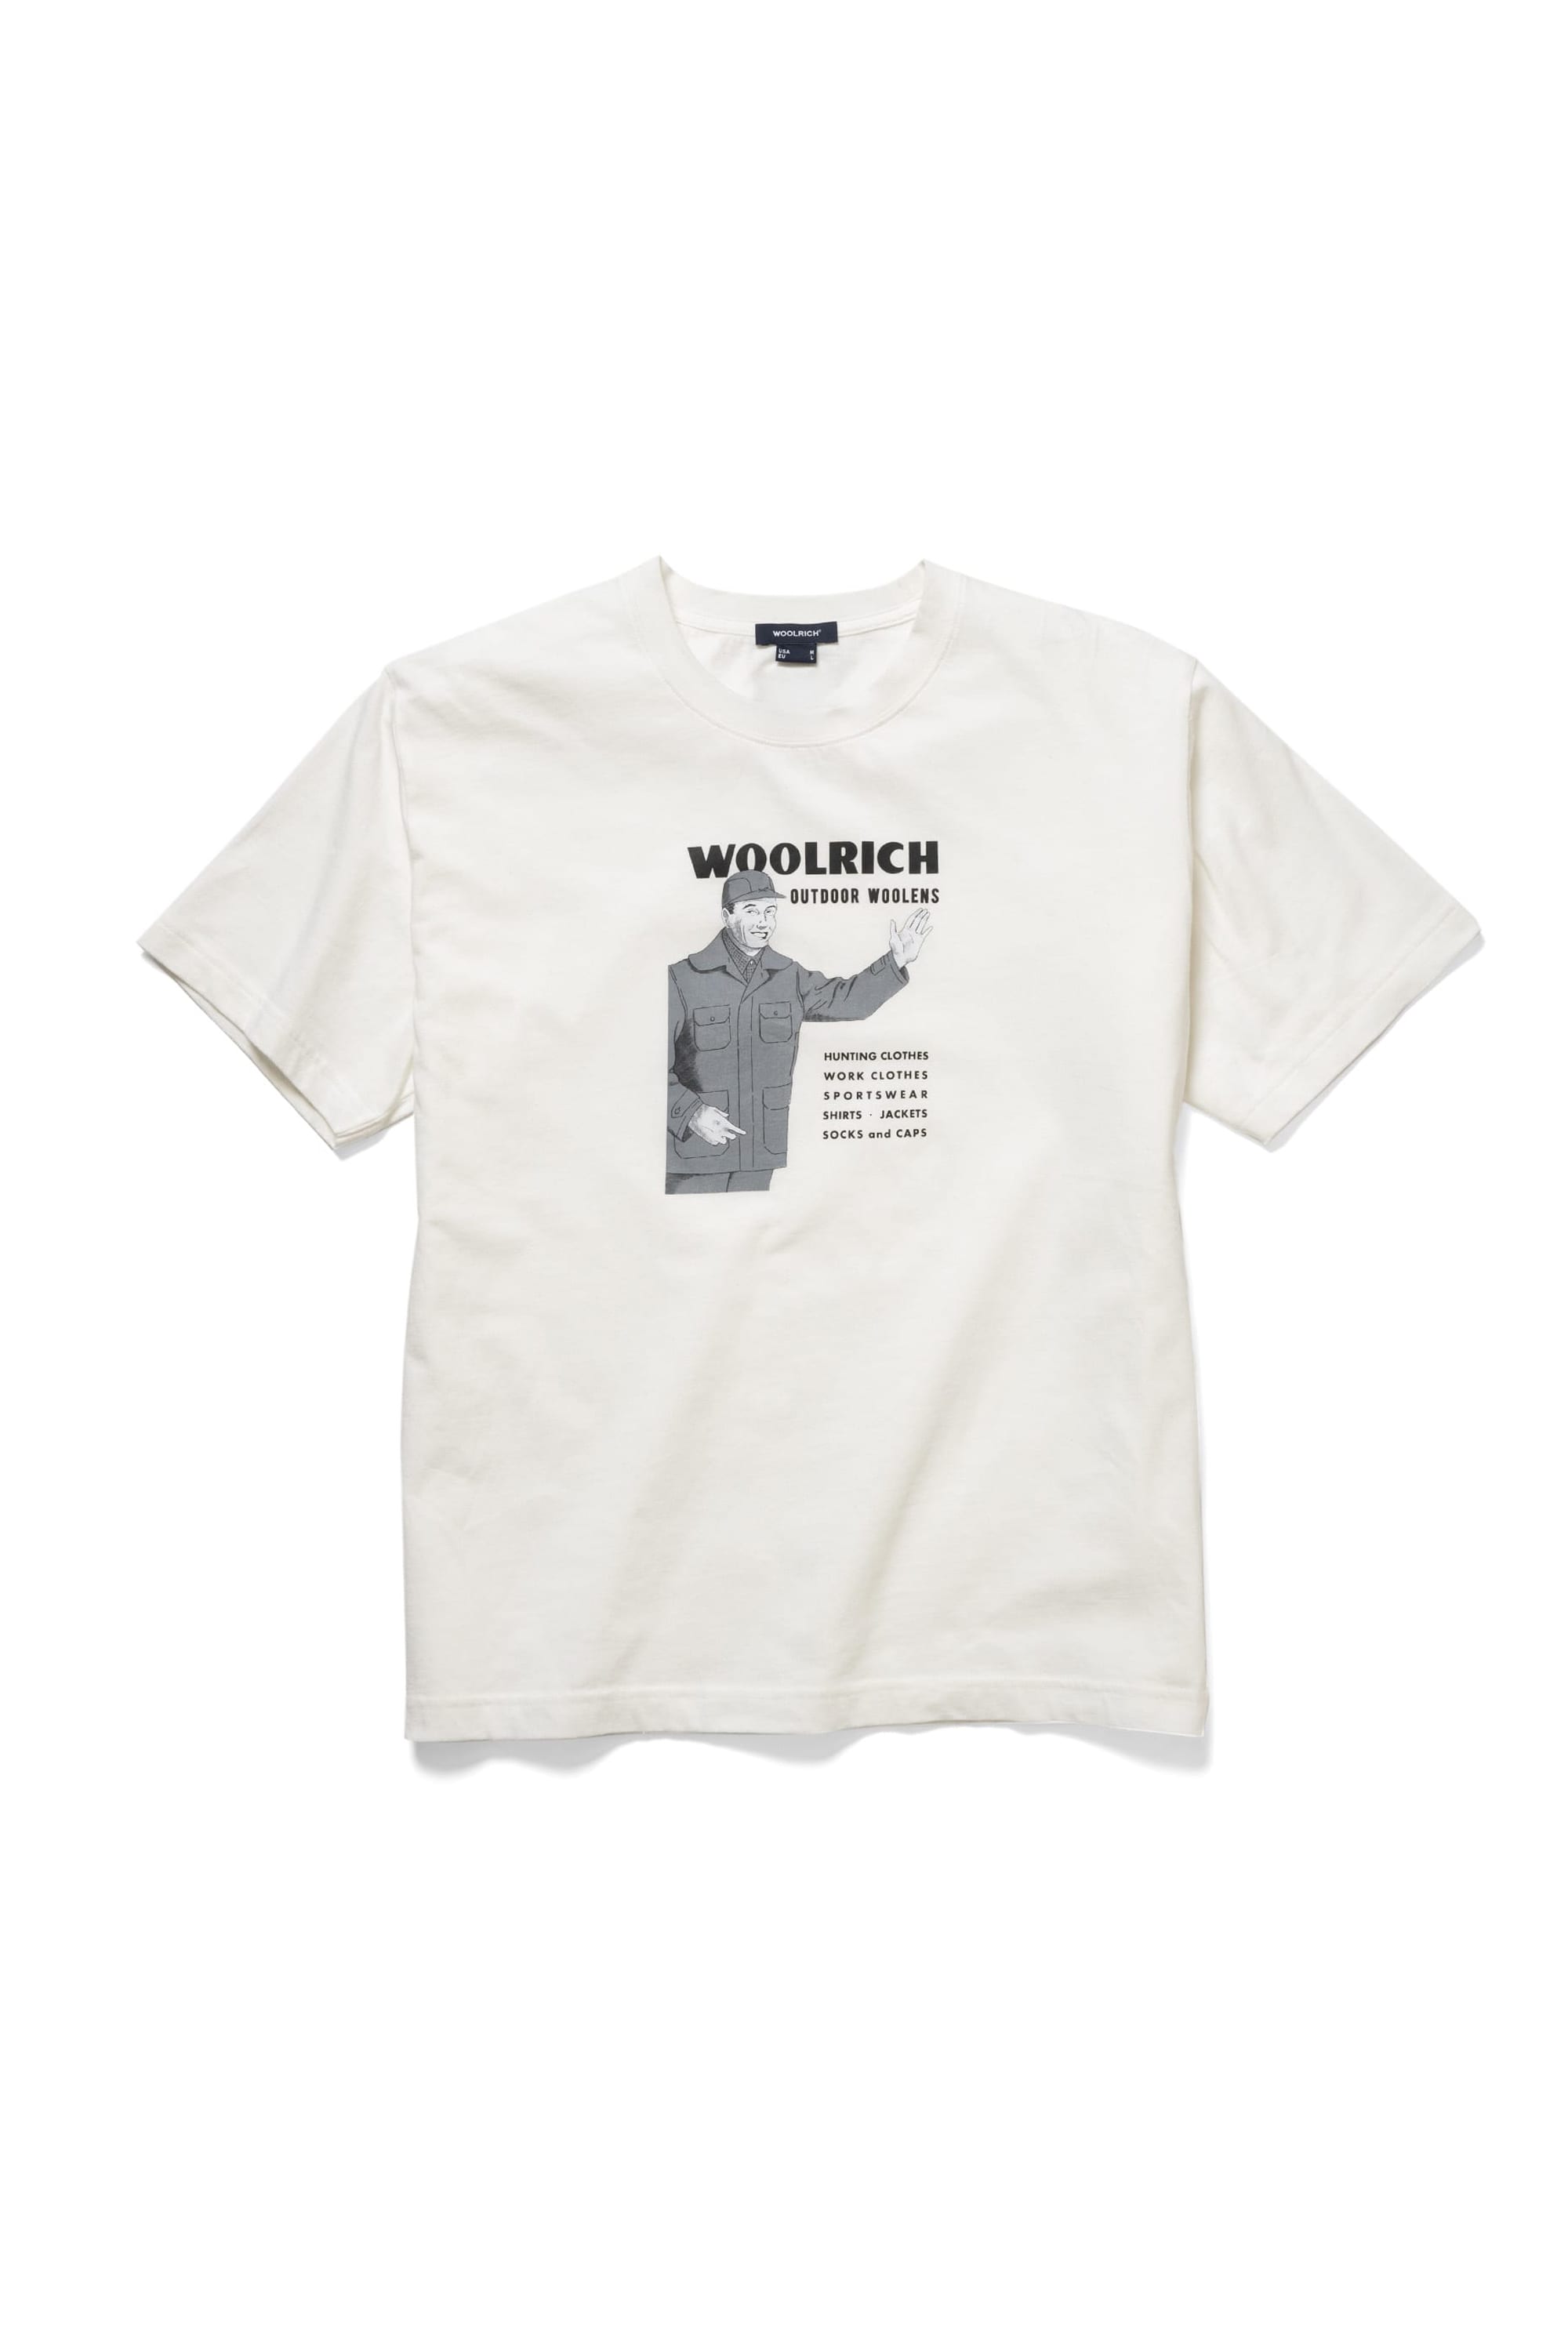 ARCHIVE GRAPHIC TEE